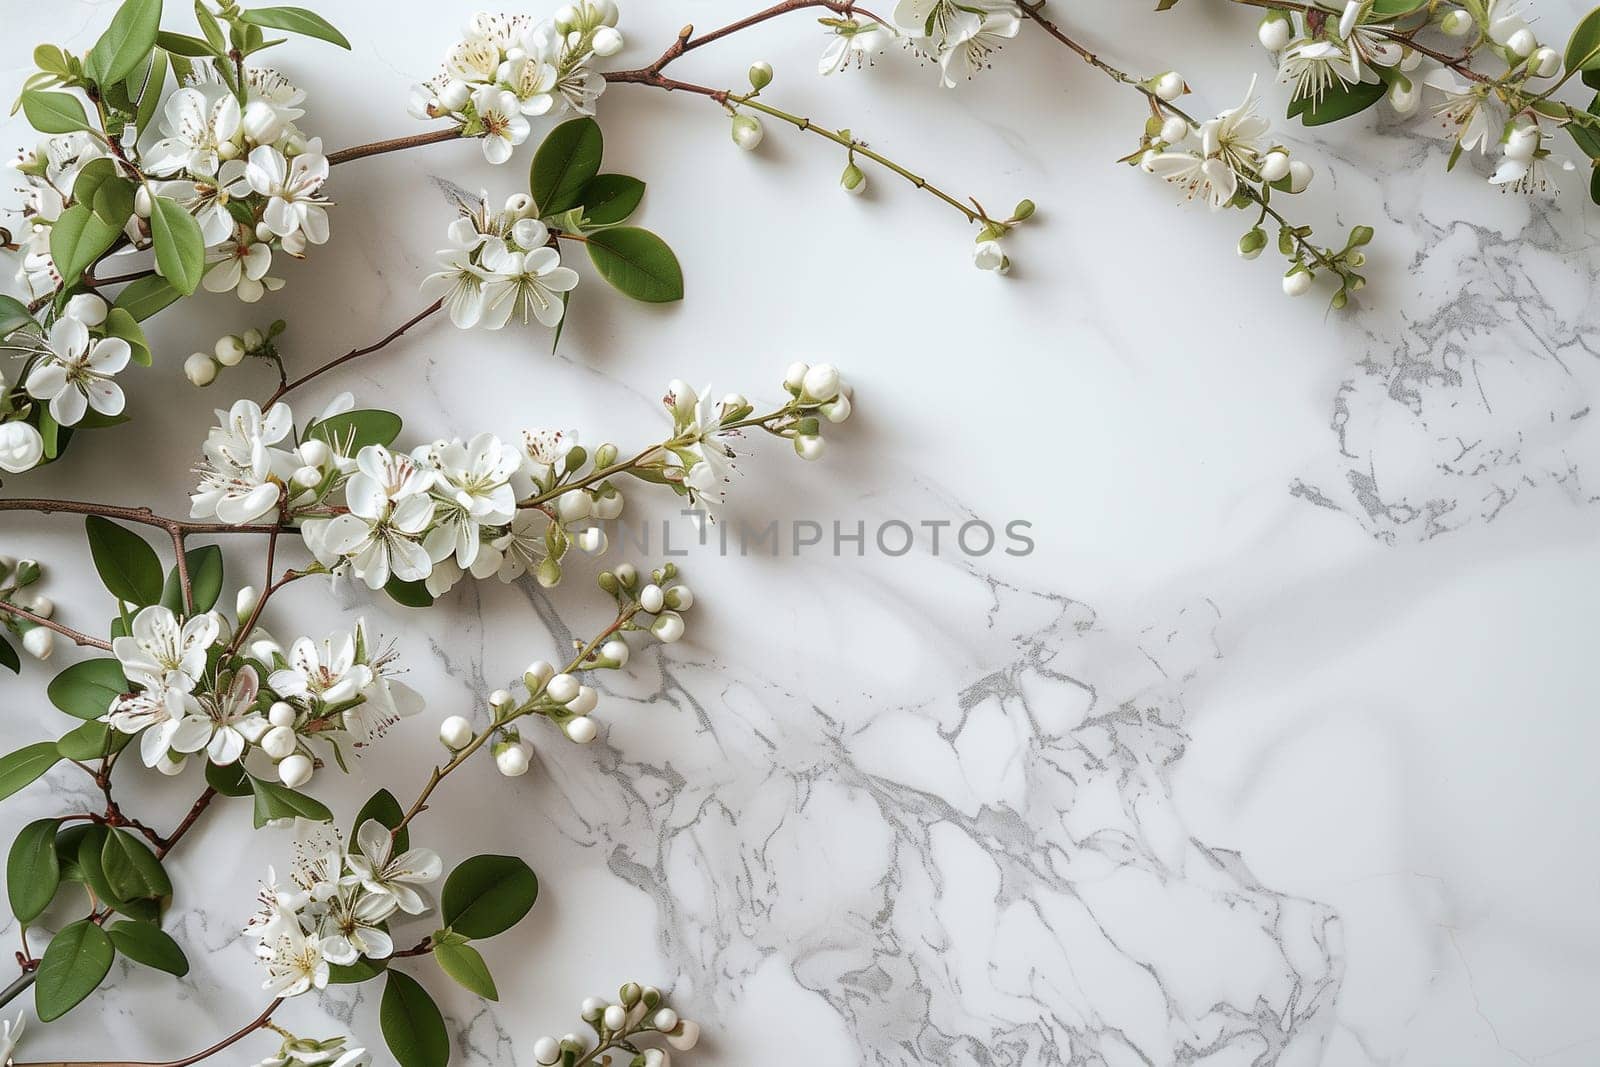 Several white flowers are arranged elegantly on a smooth marble surface, creating a visually striking contrast between the delicate blooms and the luxurious backdrop.